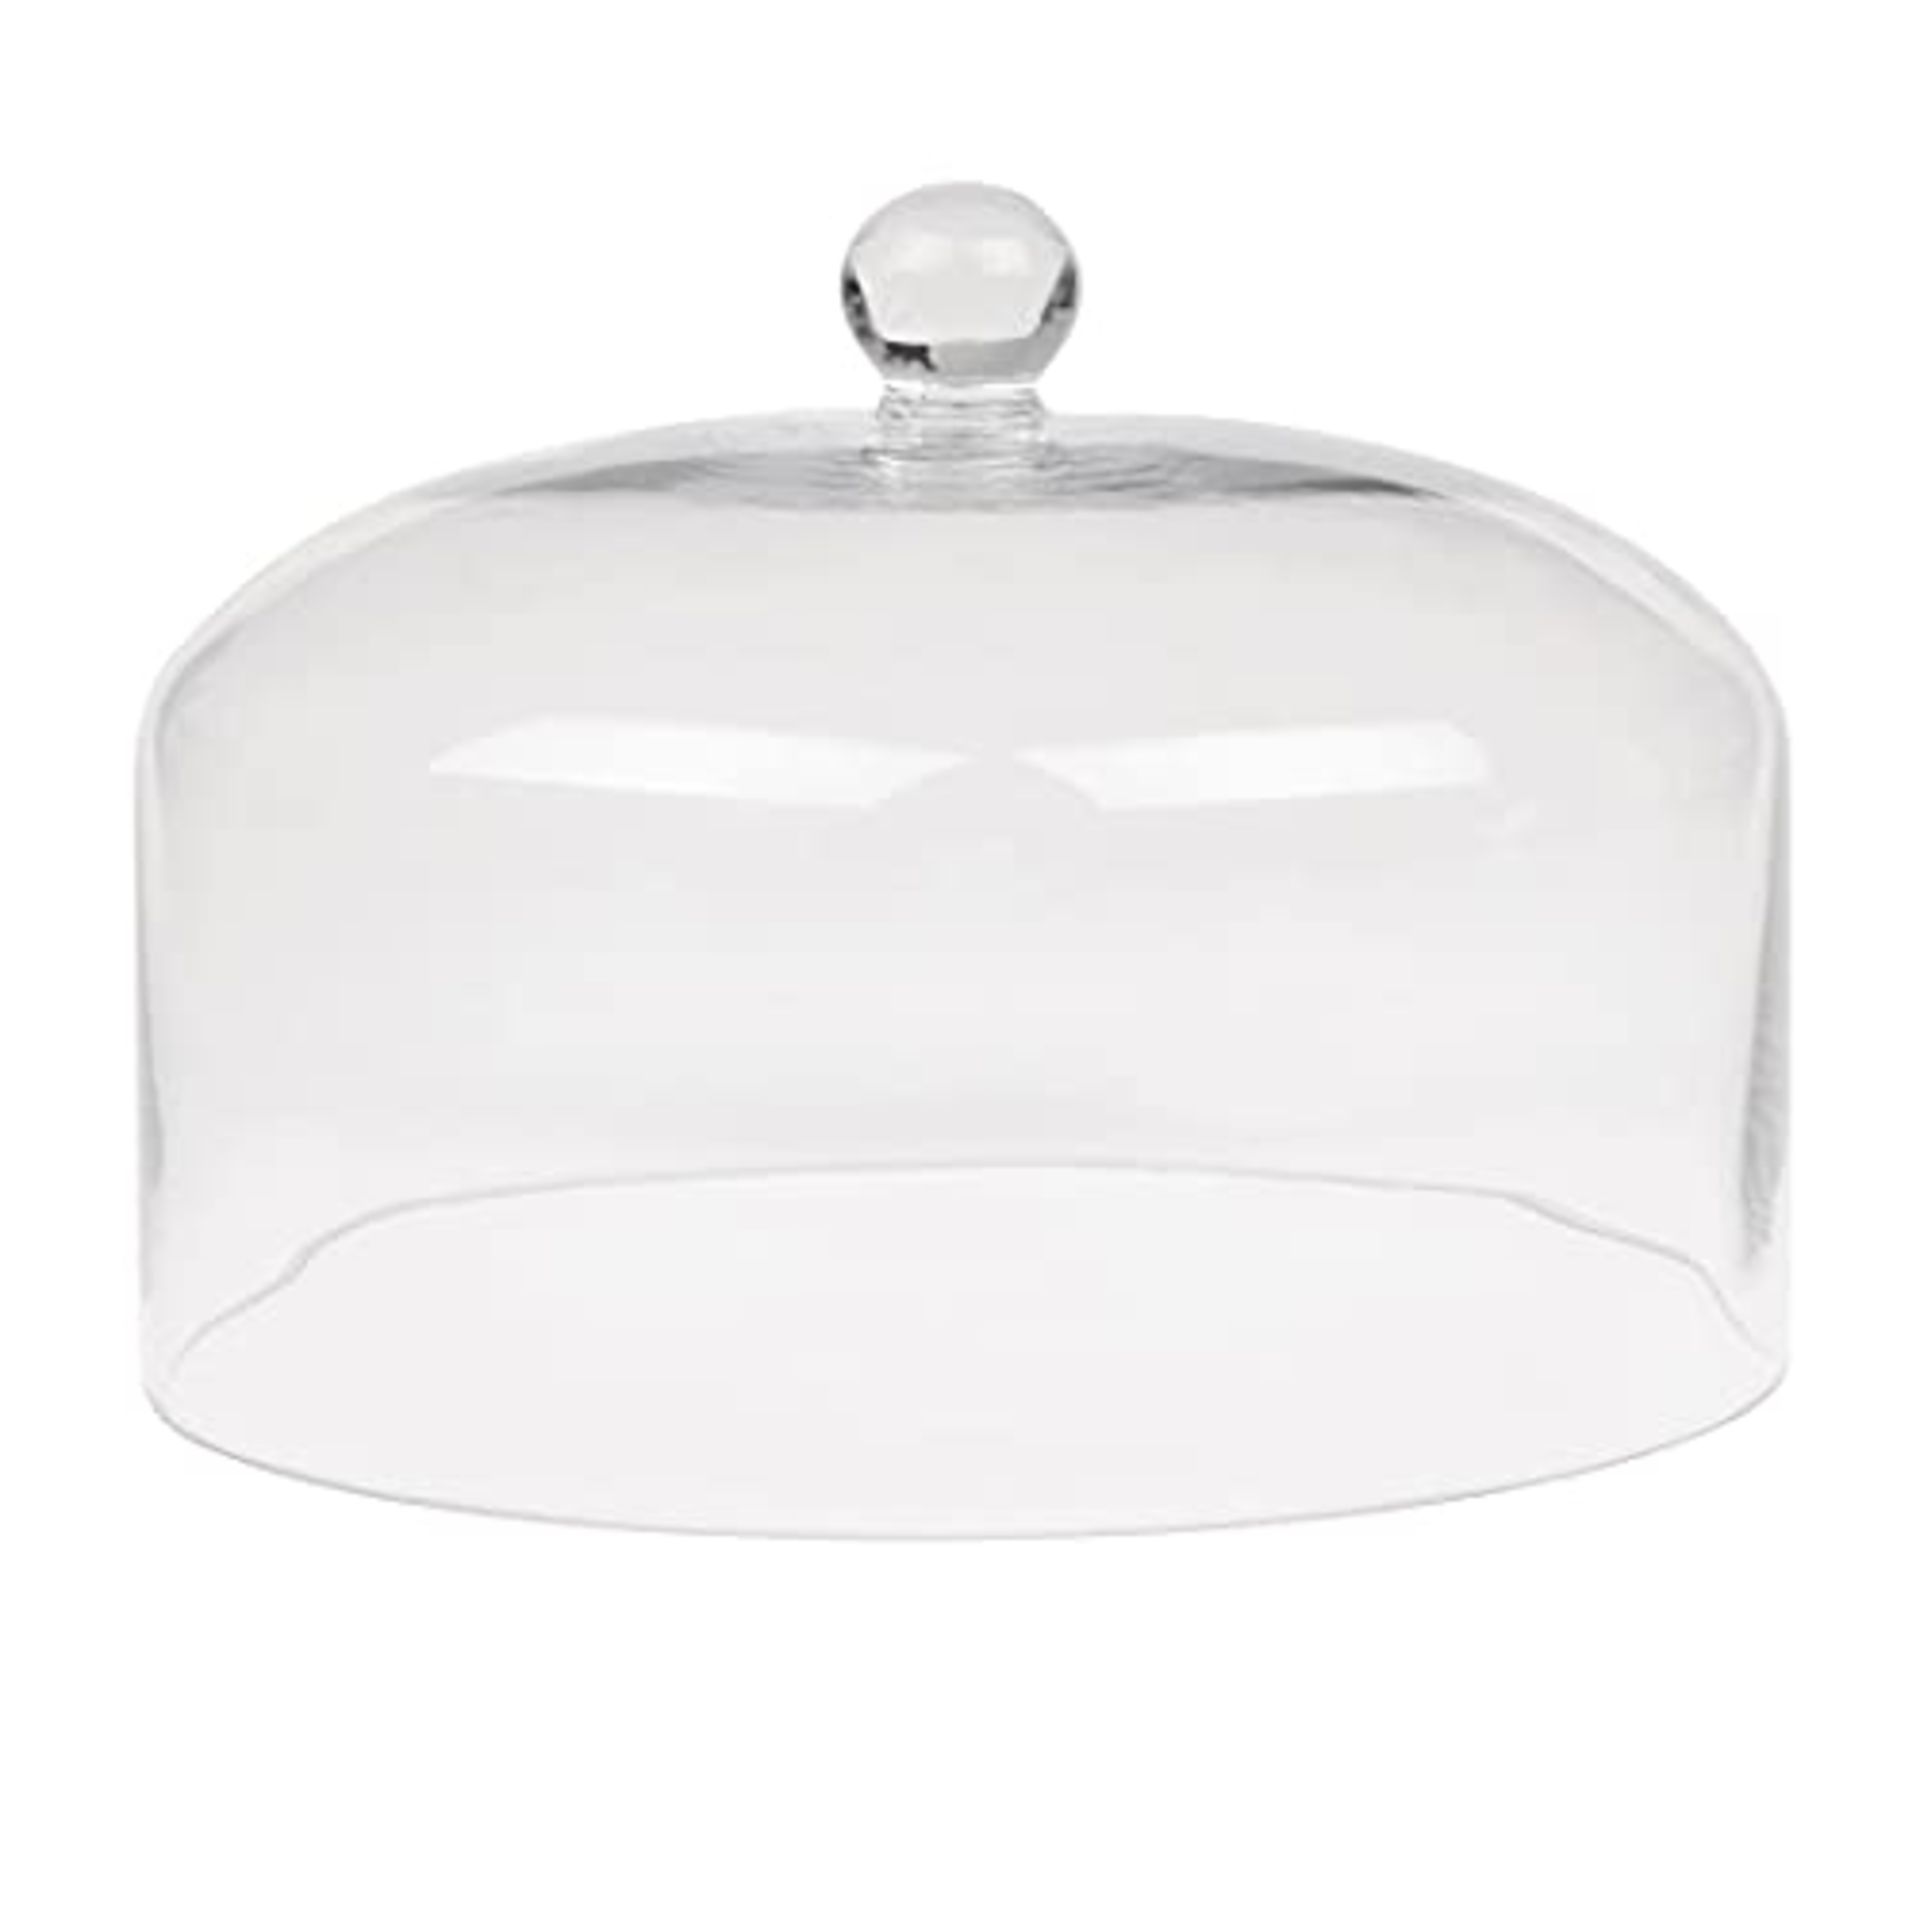 Olympia Glass Cake Stand Dome Lid, 285(Ø) x 200(H)mm, High Clarity Clear Glass, Prote